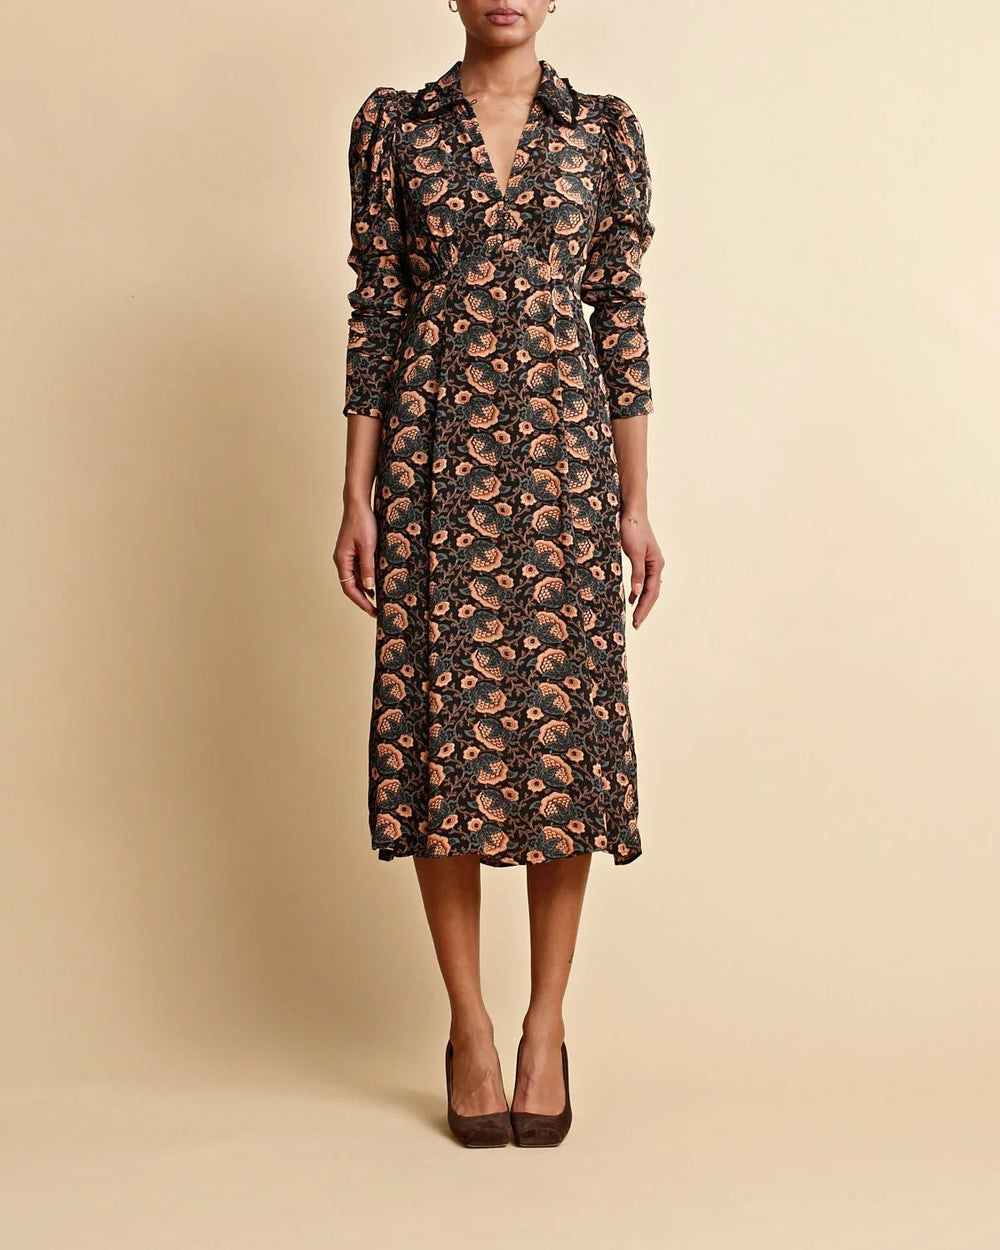 byTiMo Dress byTiMO | Autumn Collar Dress in Autumn Flowers